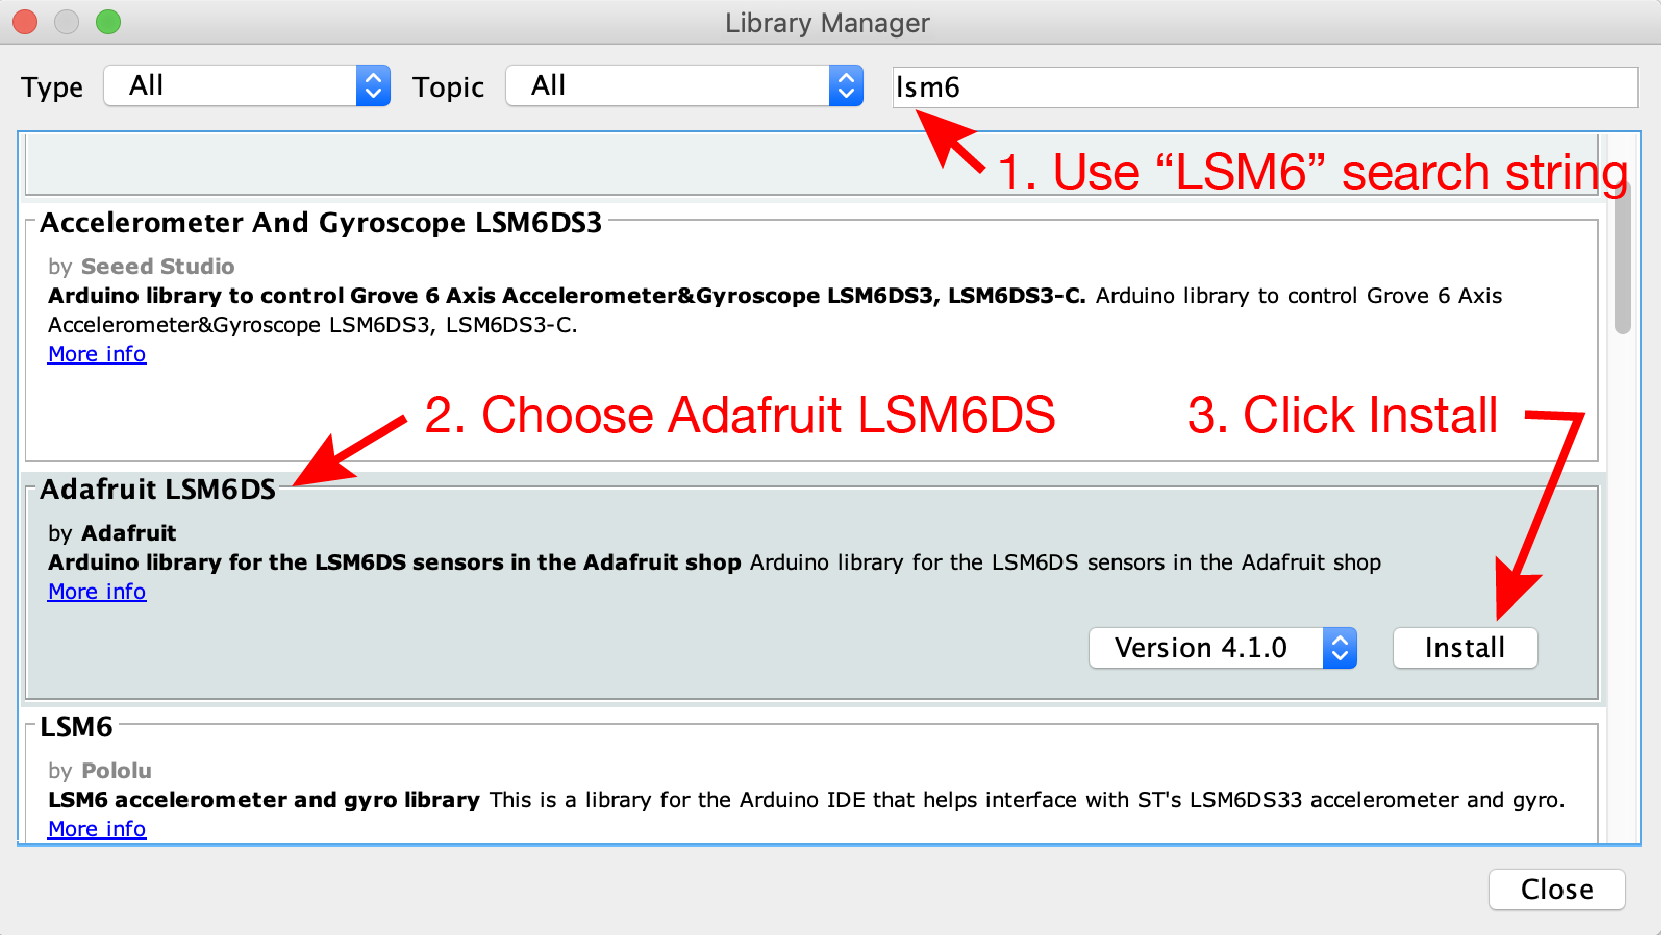 Select and install the Adafruit LSM6DS library